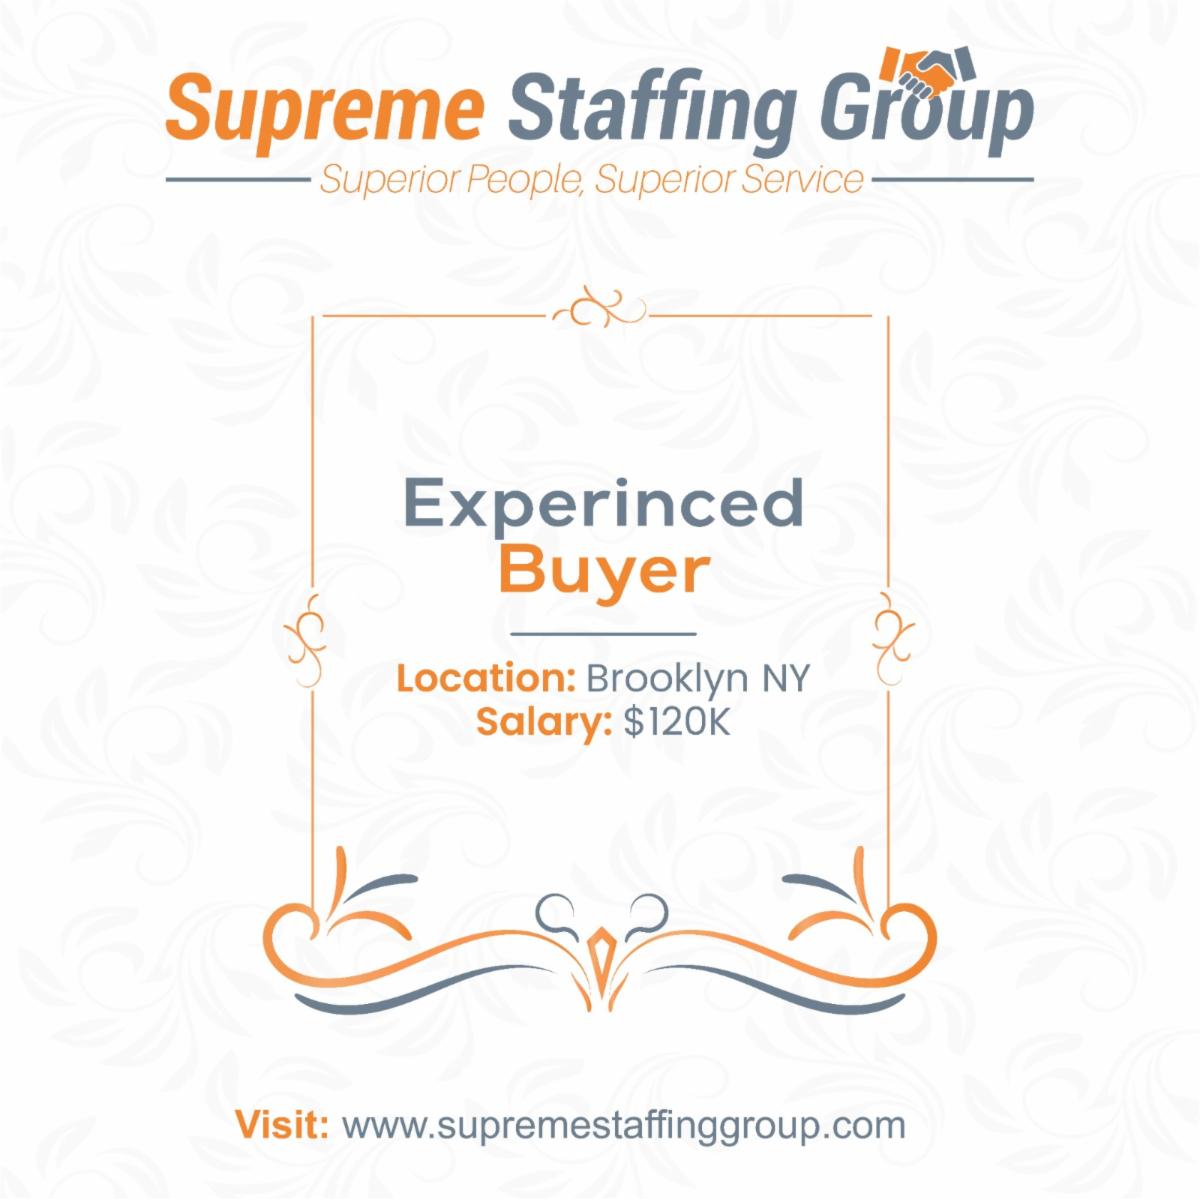 Exciting opportunity! 🌟 A dynamic building supply company in Brooklyn, NY, is looking for an Experienced Buyer! 

Apply today: bit.ly/42WM6Ti

#ExcitingOpportunity #JoinOurTeam #BuildingSupply #Brooklyn #ExperiencedBuyer #VendorManagement #SourcingExpertise